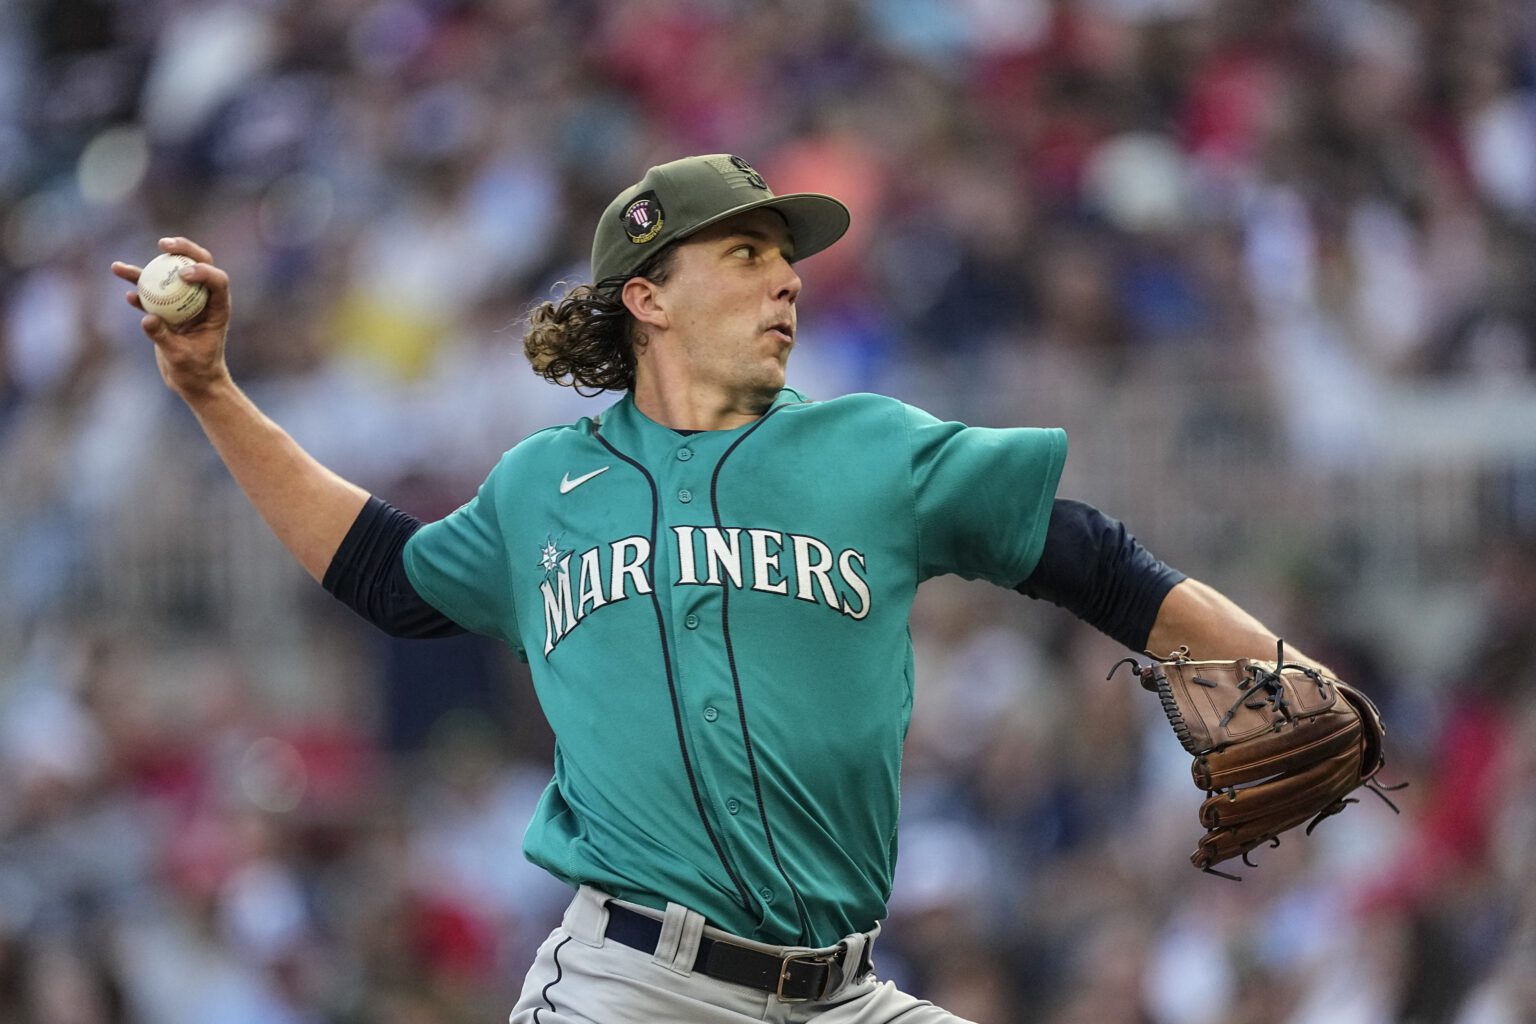 Seattle Mariners starting pitcher Logan Gilbert works against the Atlanta Braves in the first inning of a baseball game